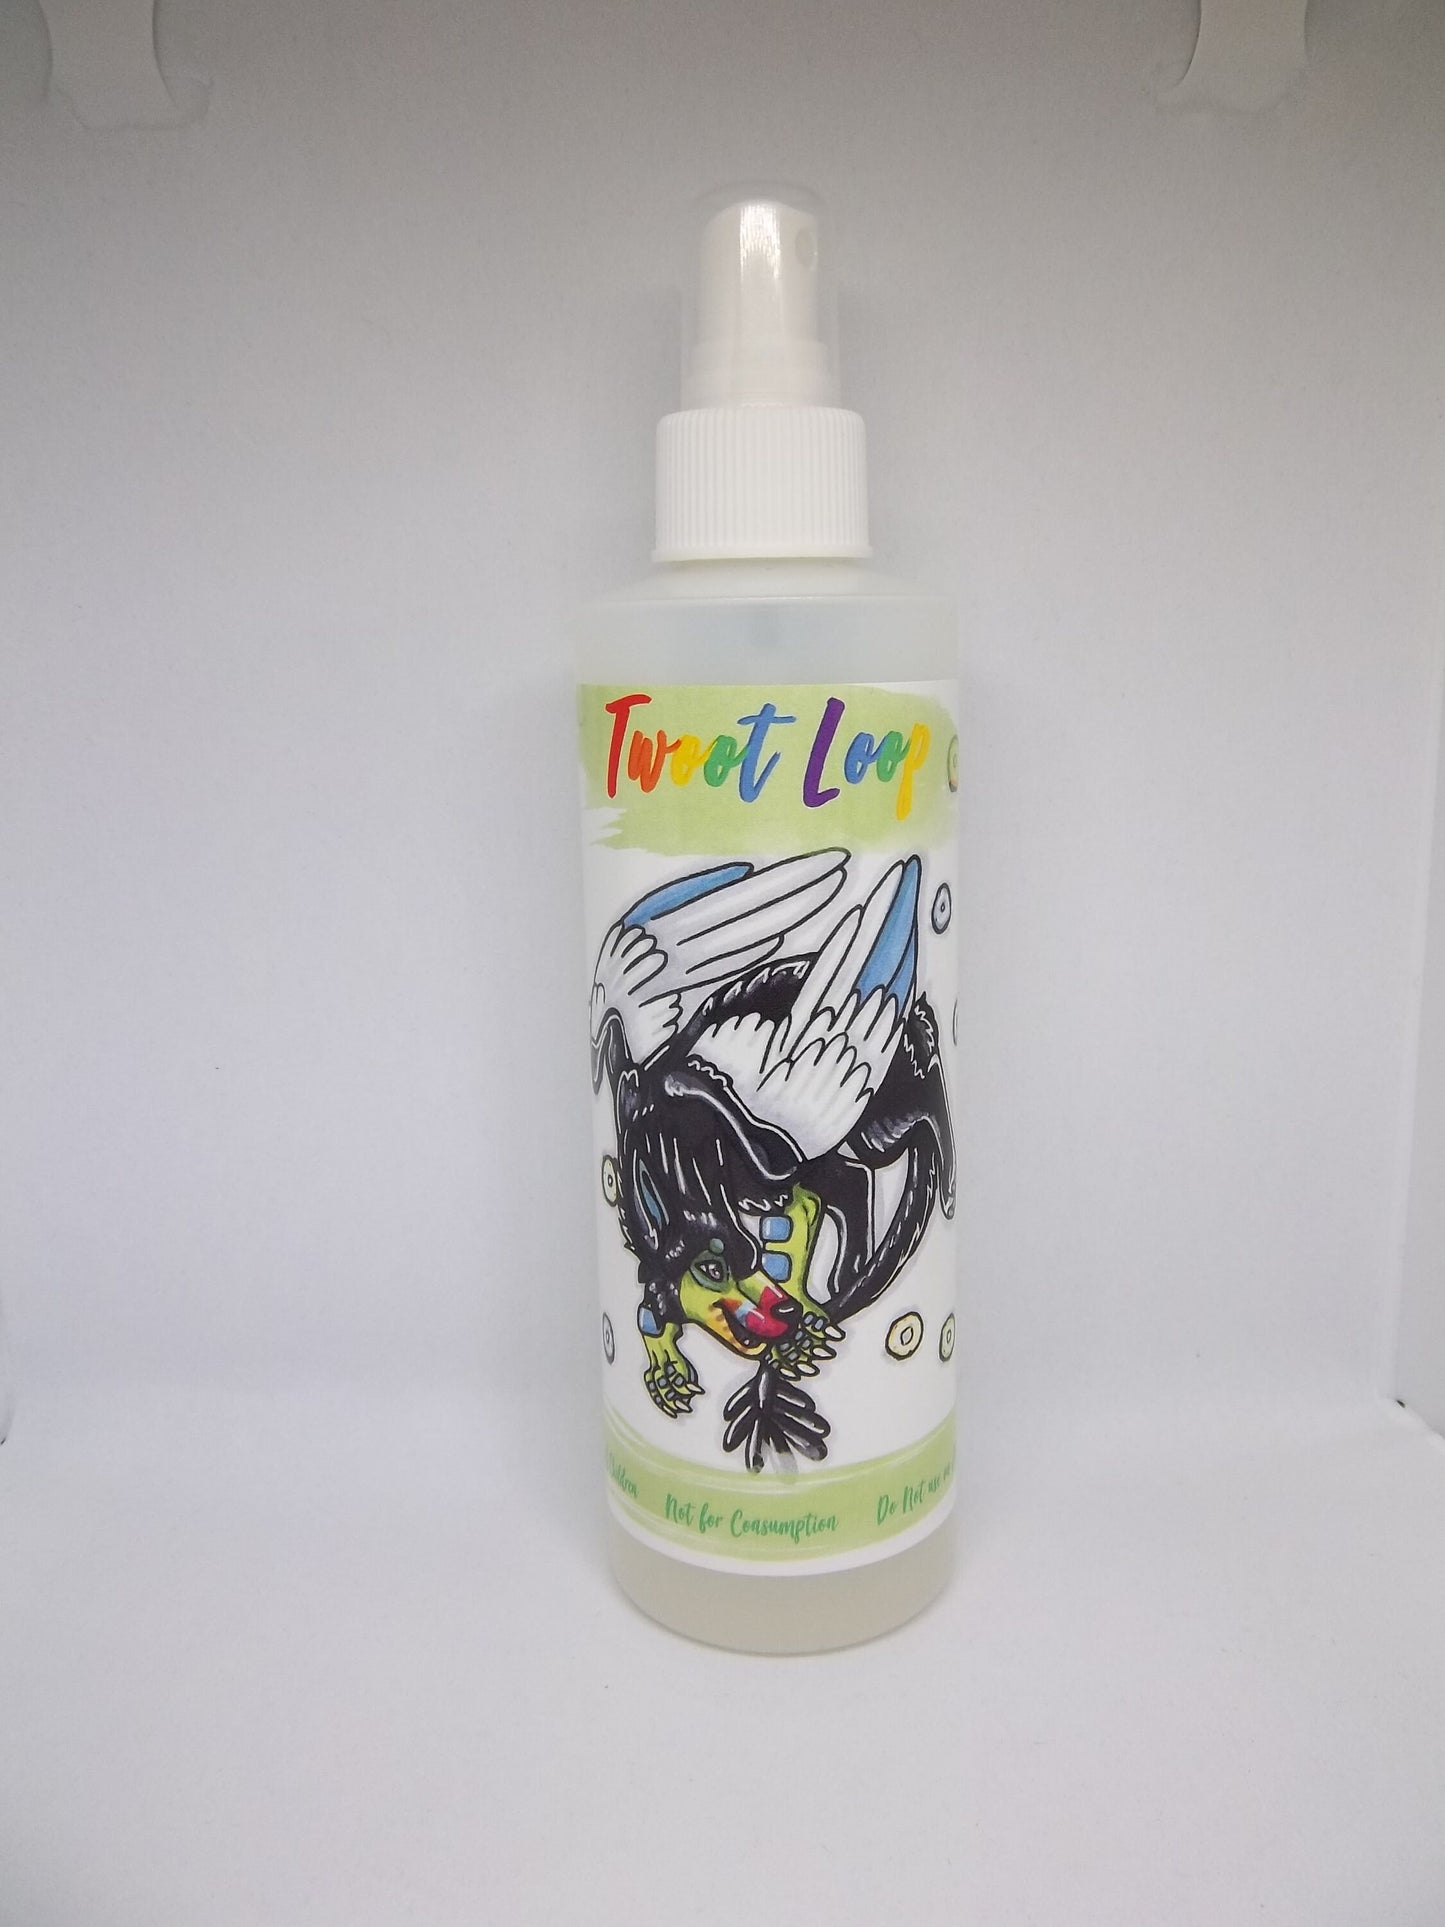 Fruity Cereal Fursuit Spray 8oz - Twoot Loop Fragrance and Essential Costume Cleaner